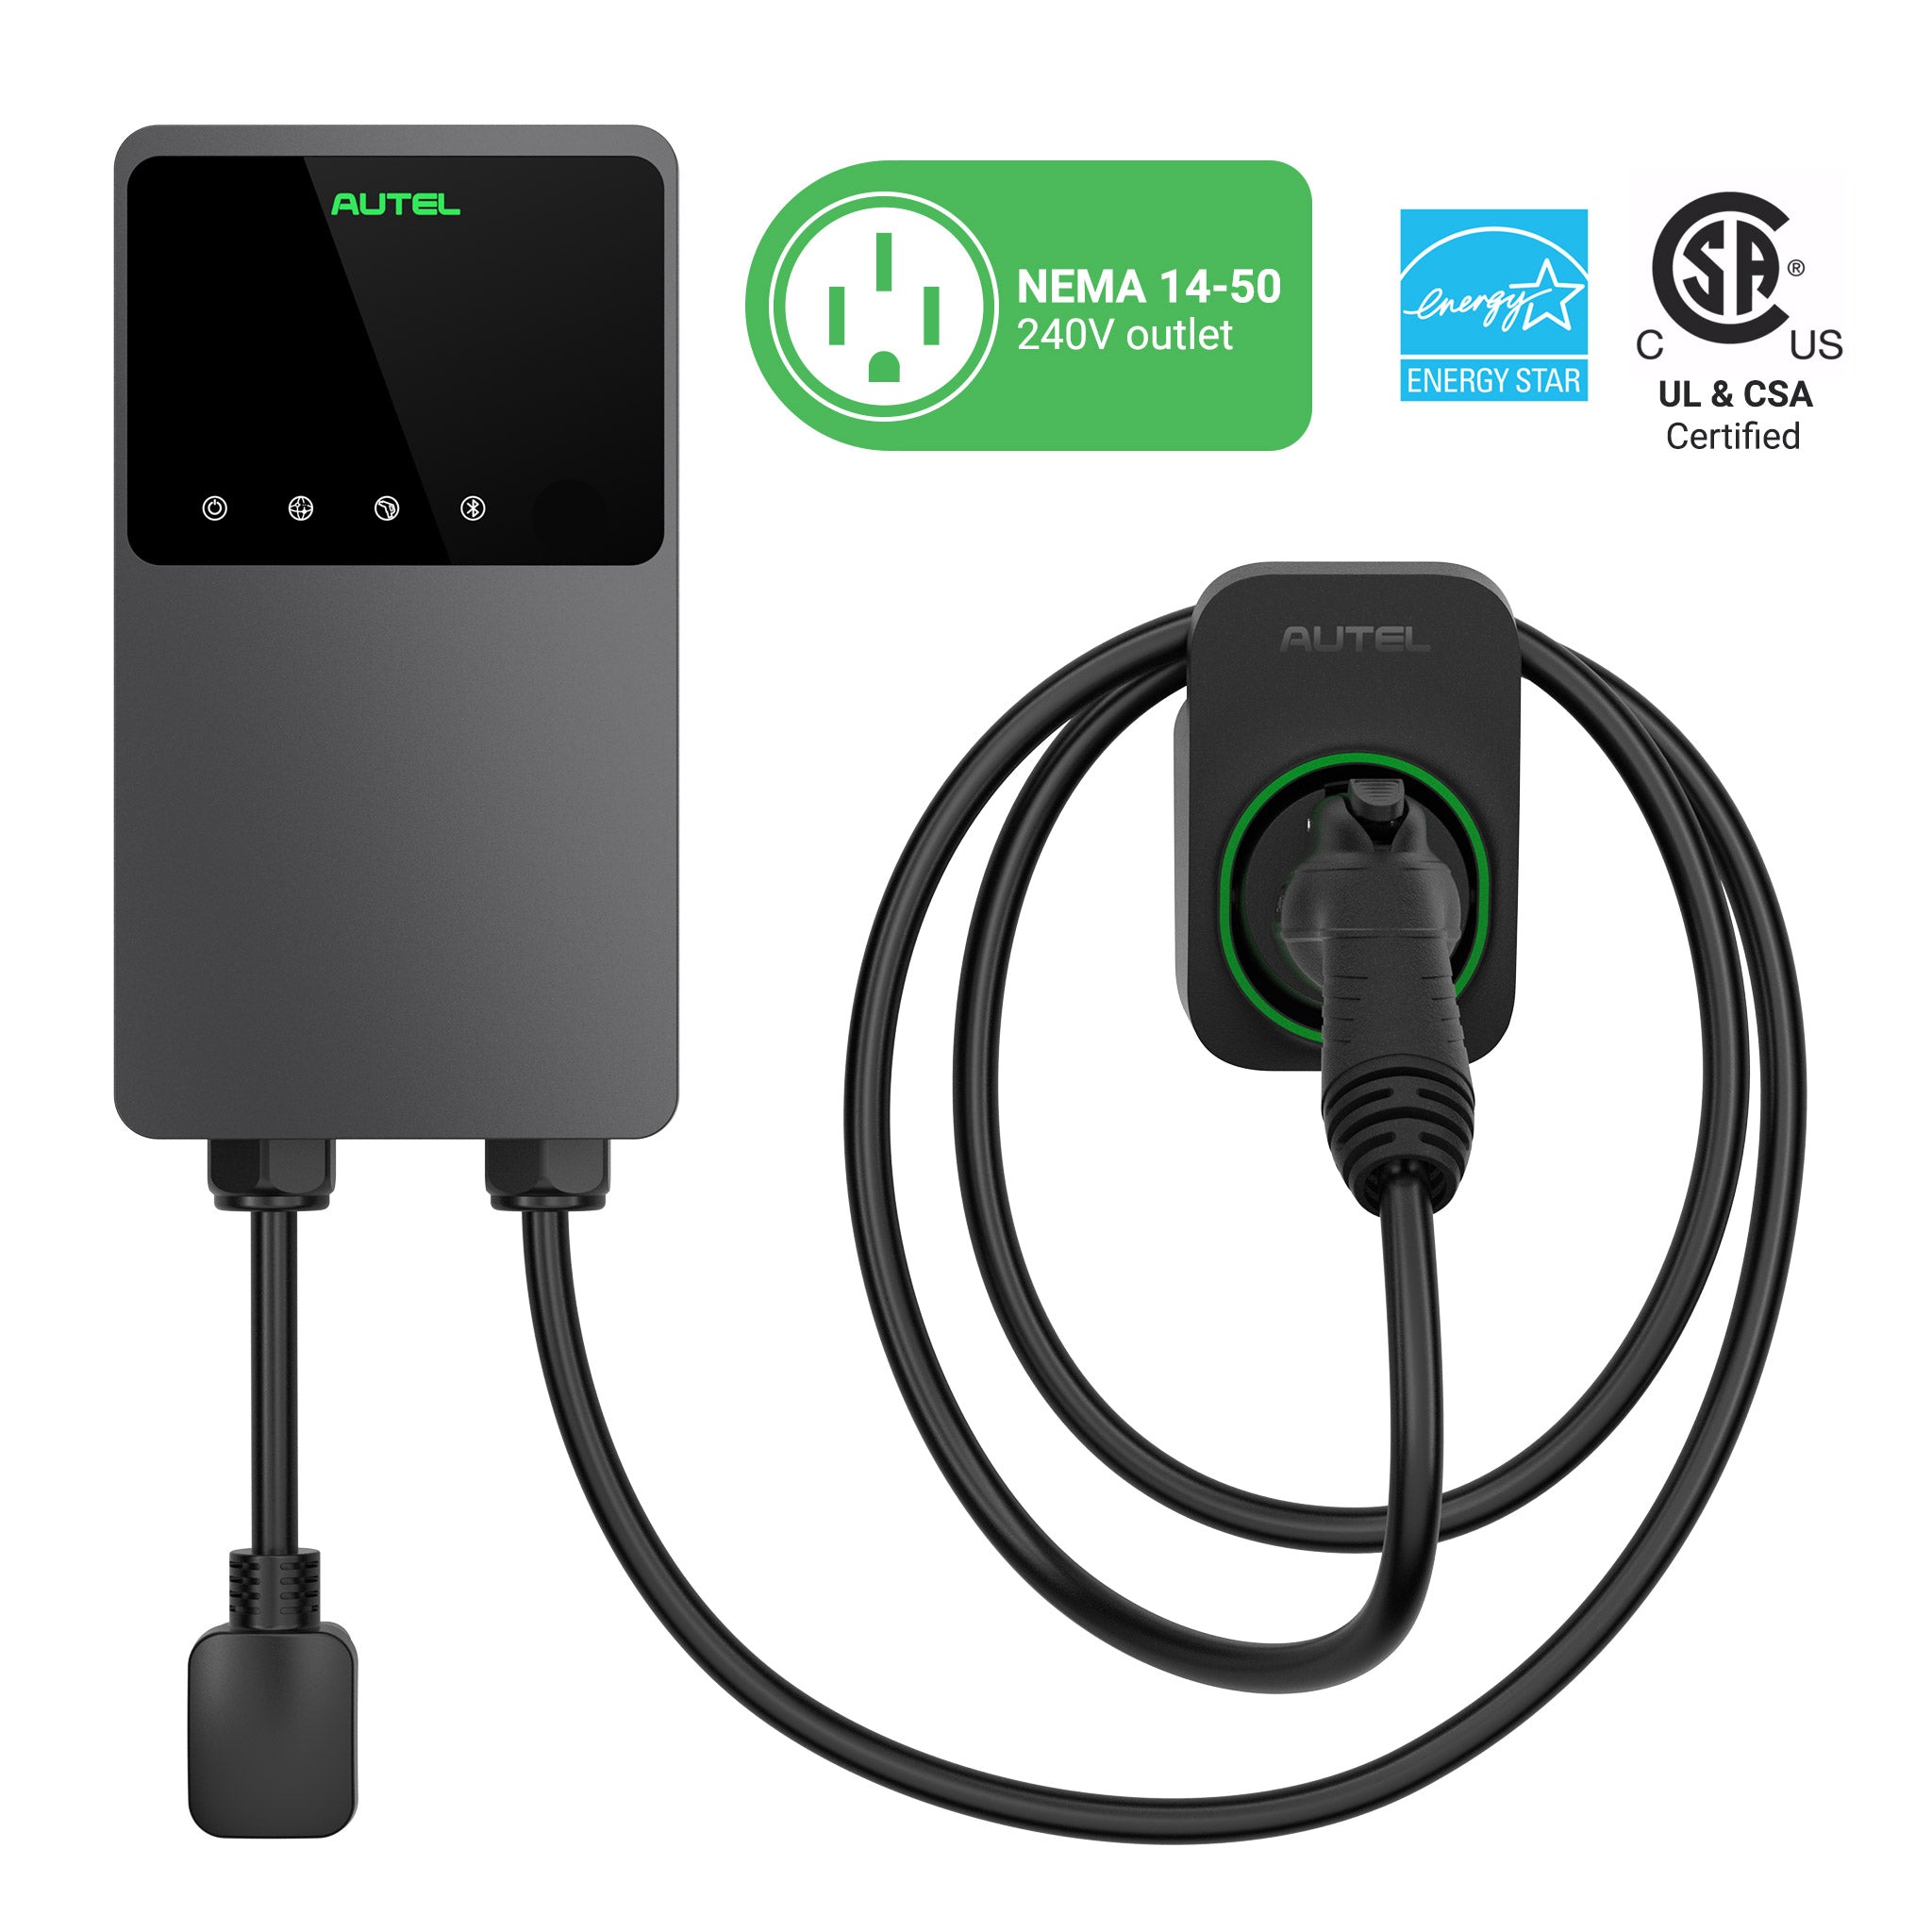 Autel Home Smart Electric Vehicle (EV) Charger up to 50Amp,Level EV Charger,Energy Star, CSA,Wi-Fi and Bluetooth Enabled EVSE, 25-Foot Cable - 1